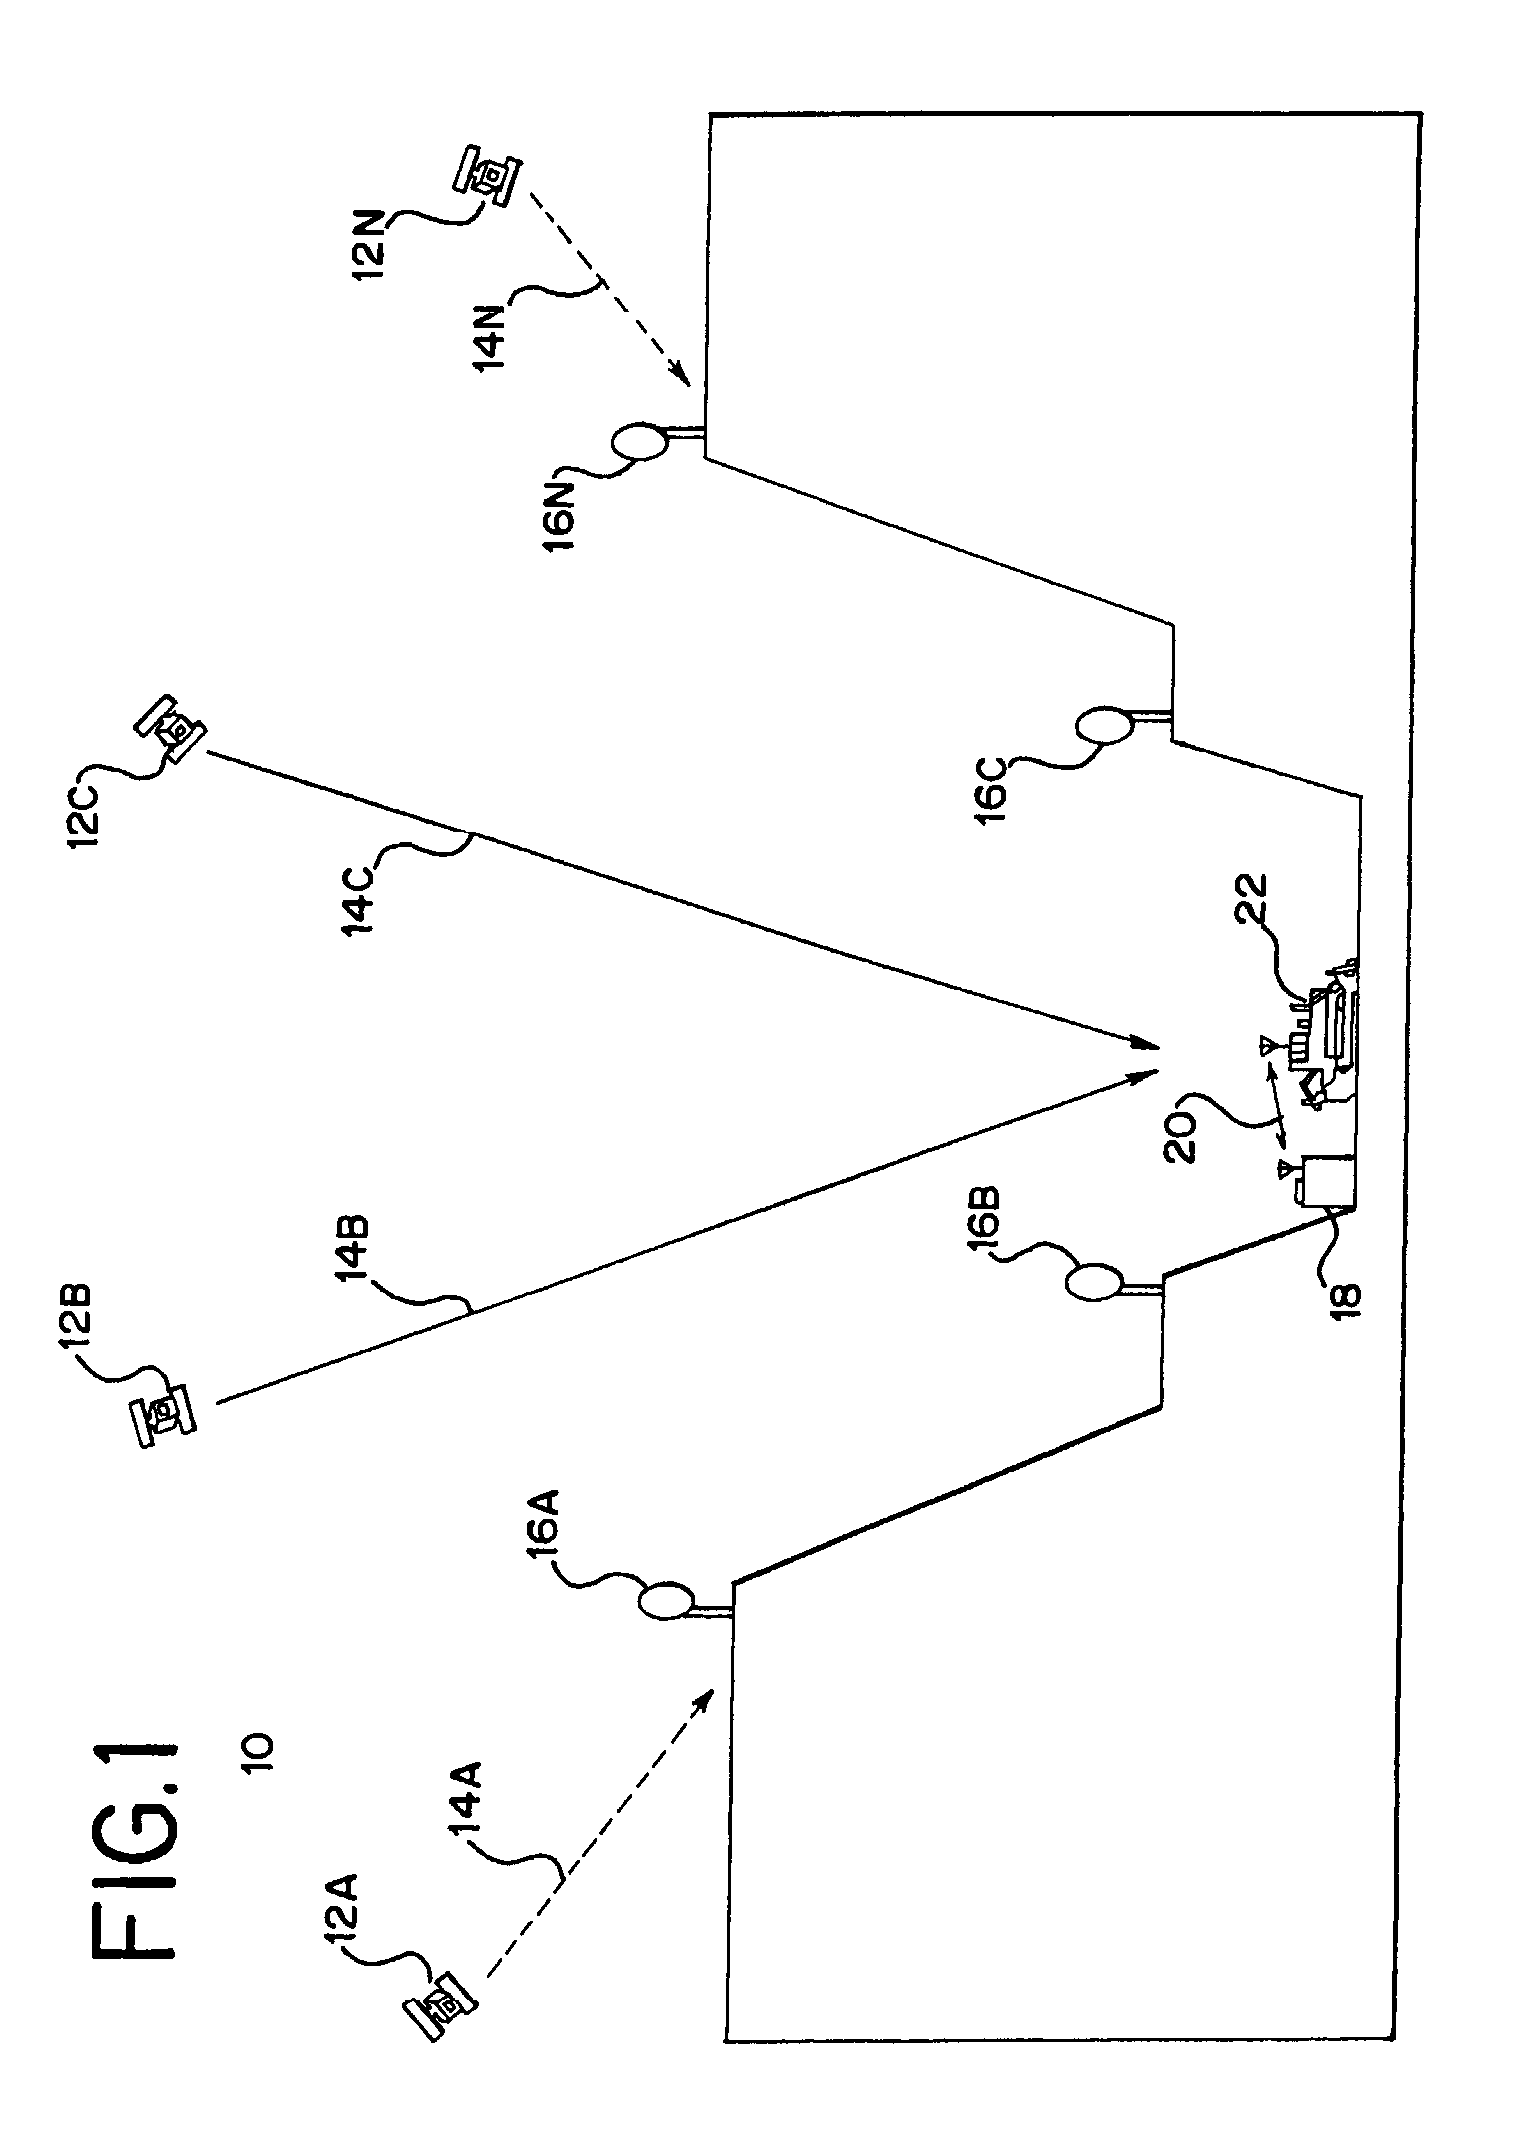 Distributed radio frequency ranging signal receiver for navigation or position determination